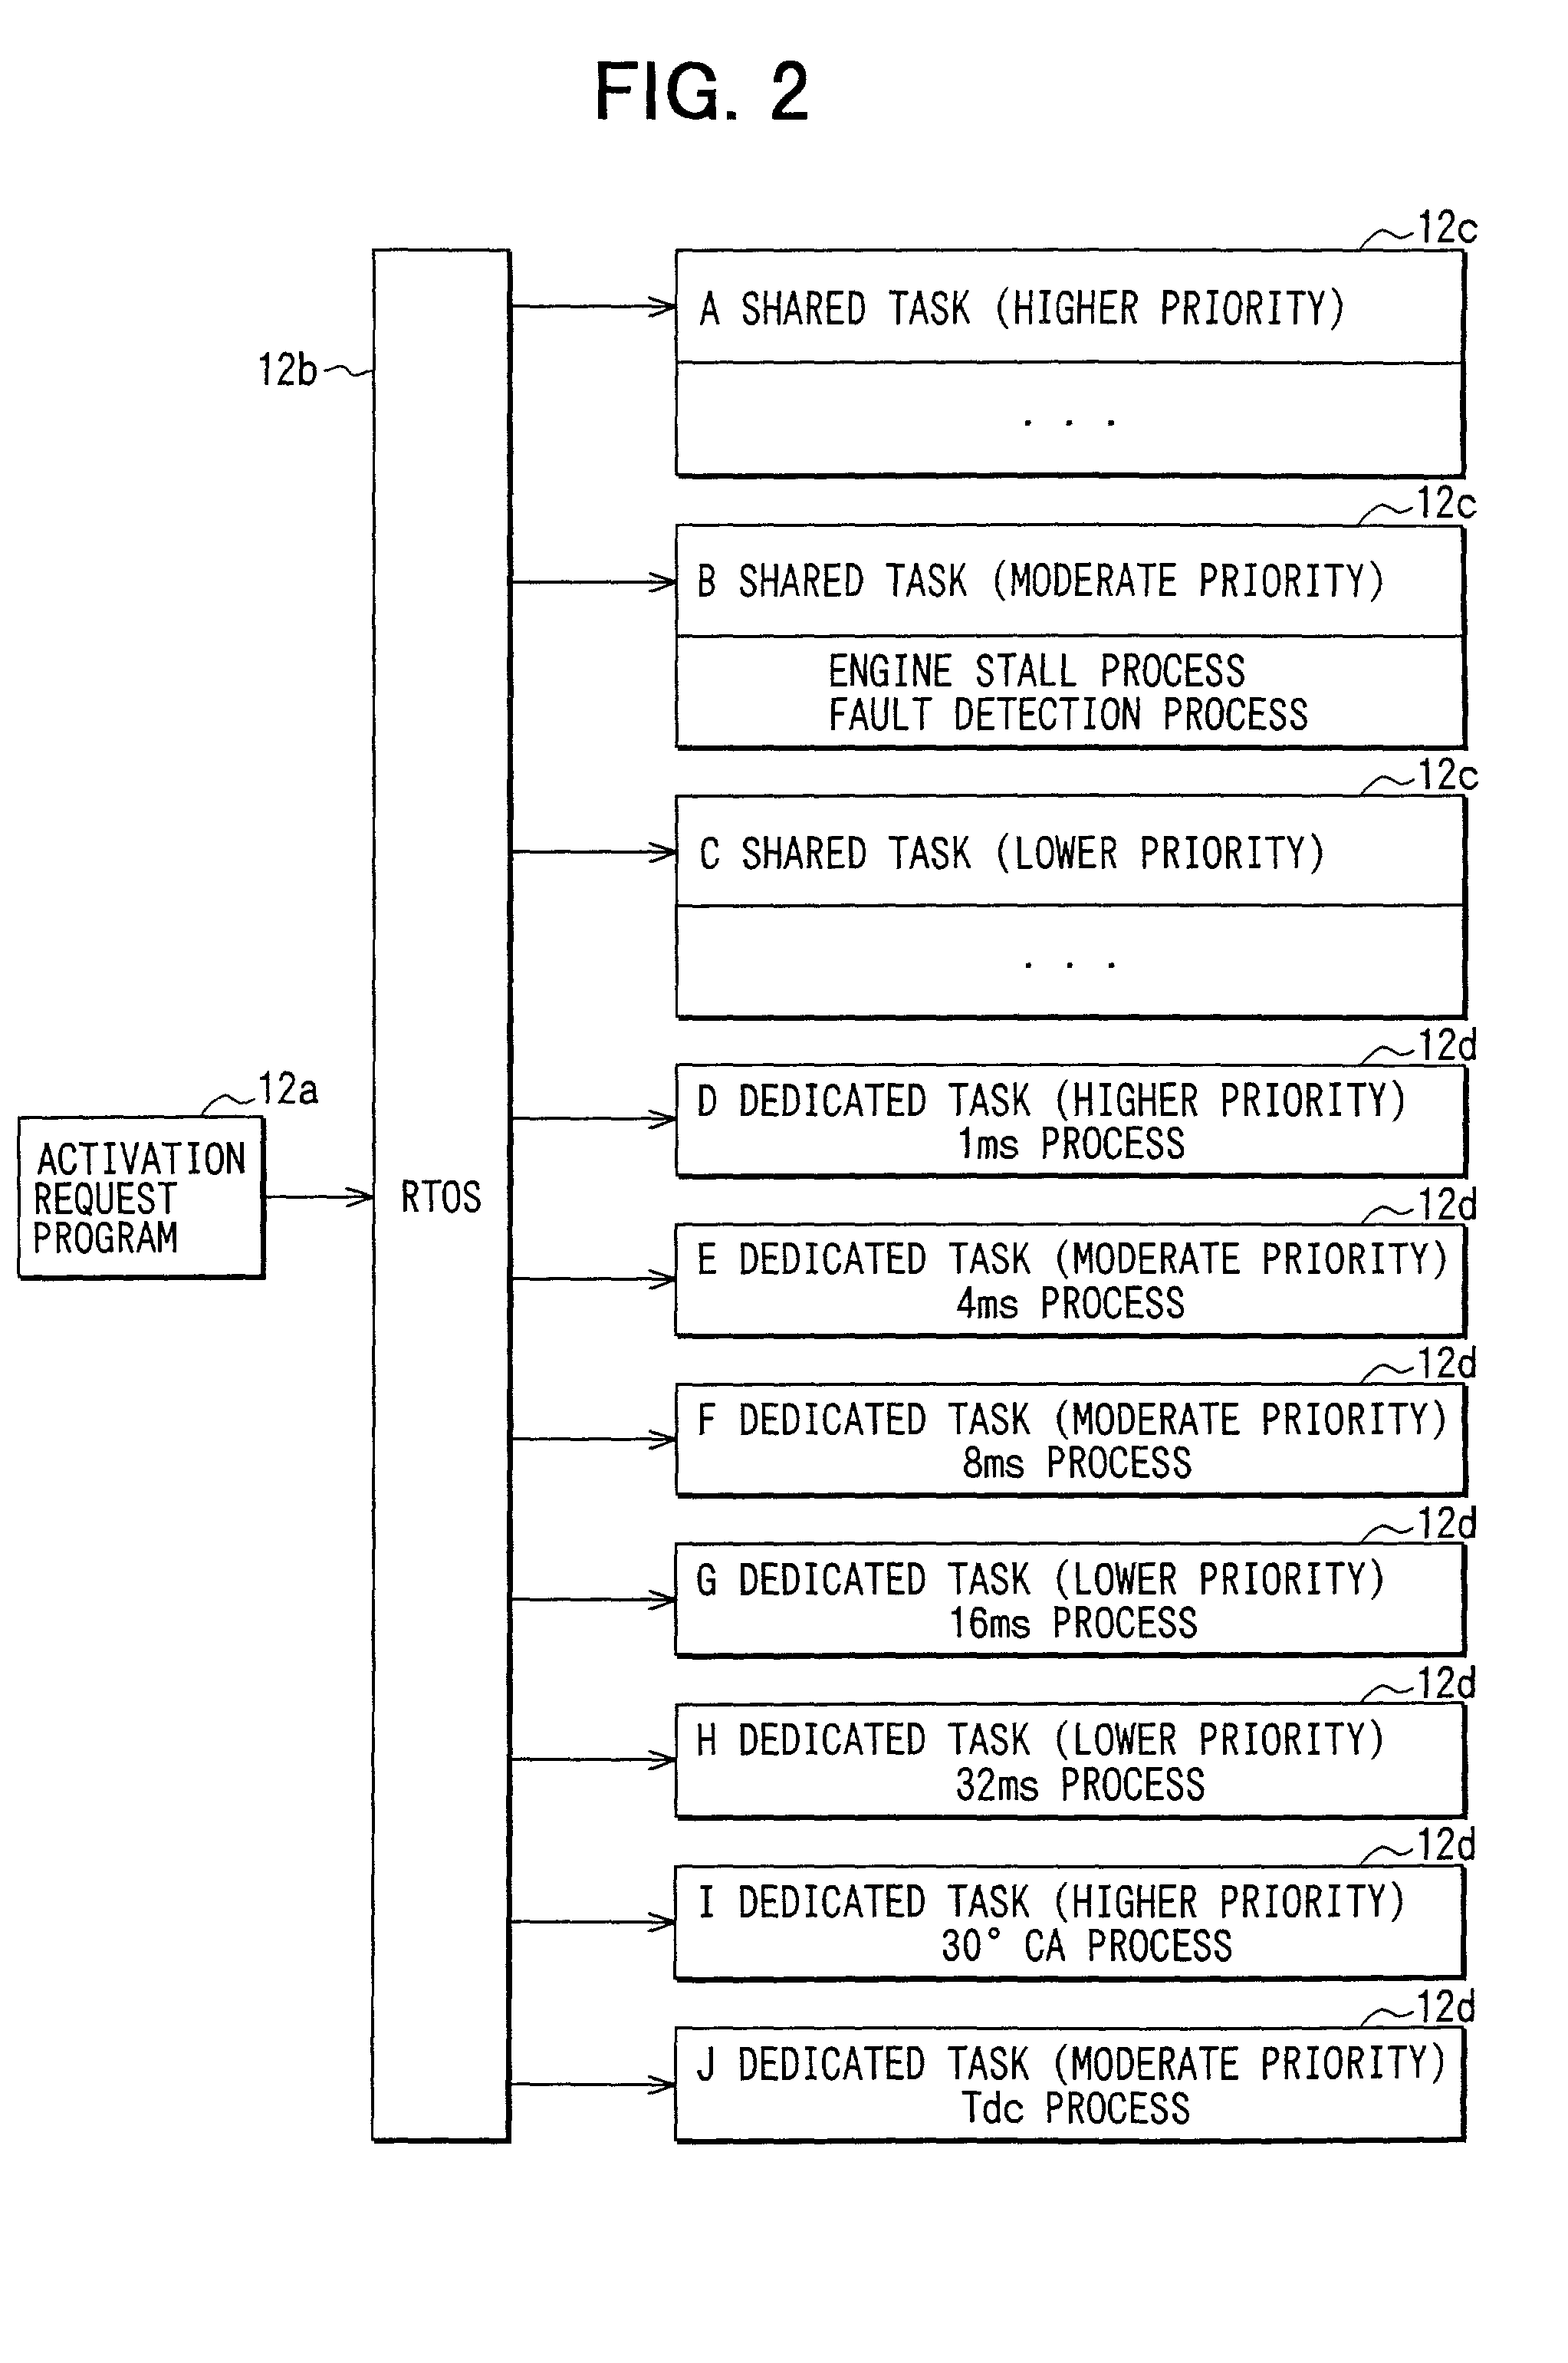 Processor unit for executing event process in real time in response to occurrence of event